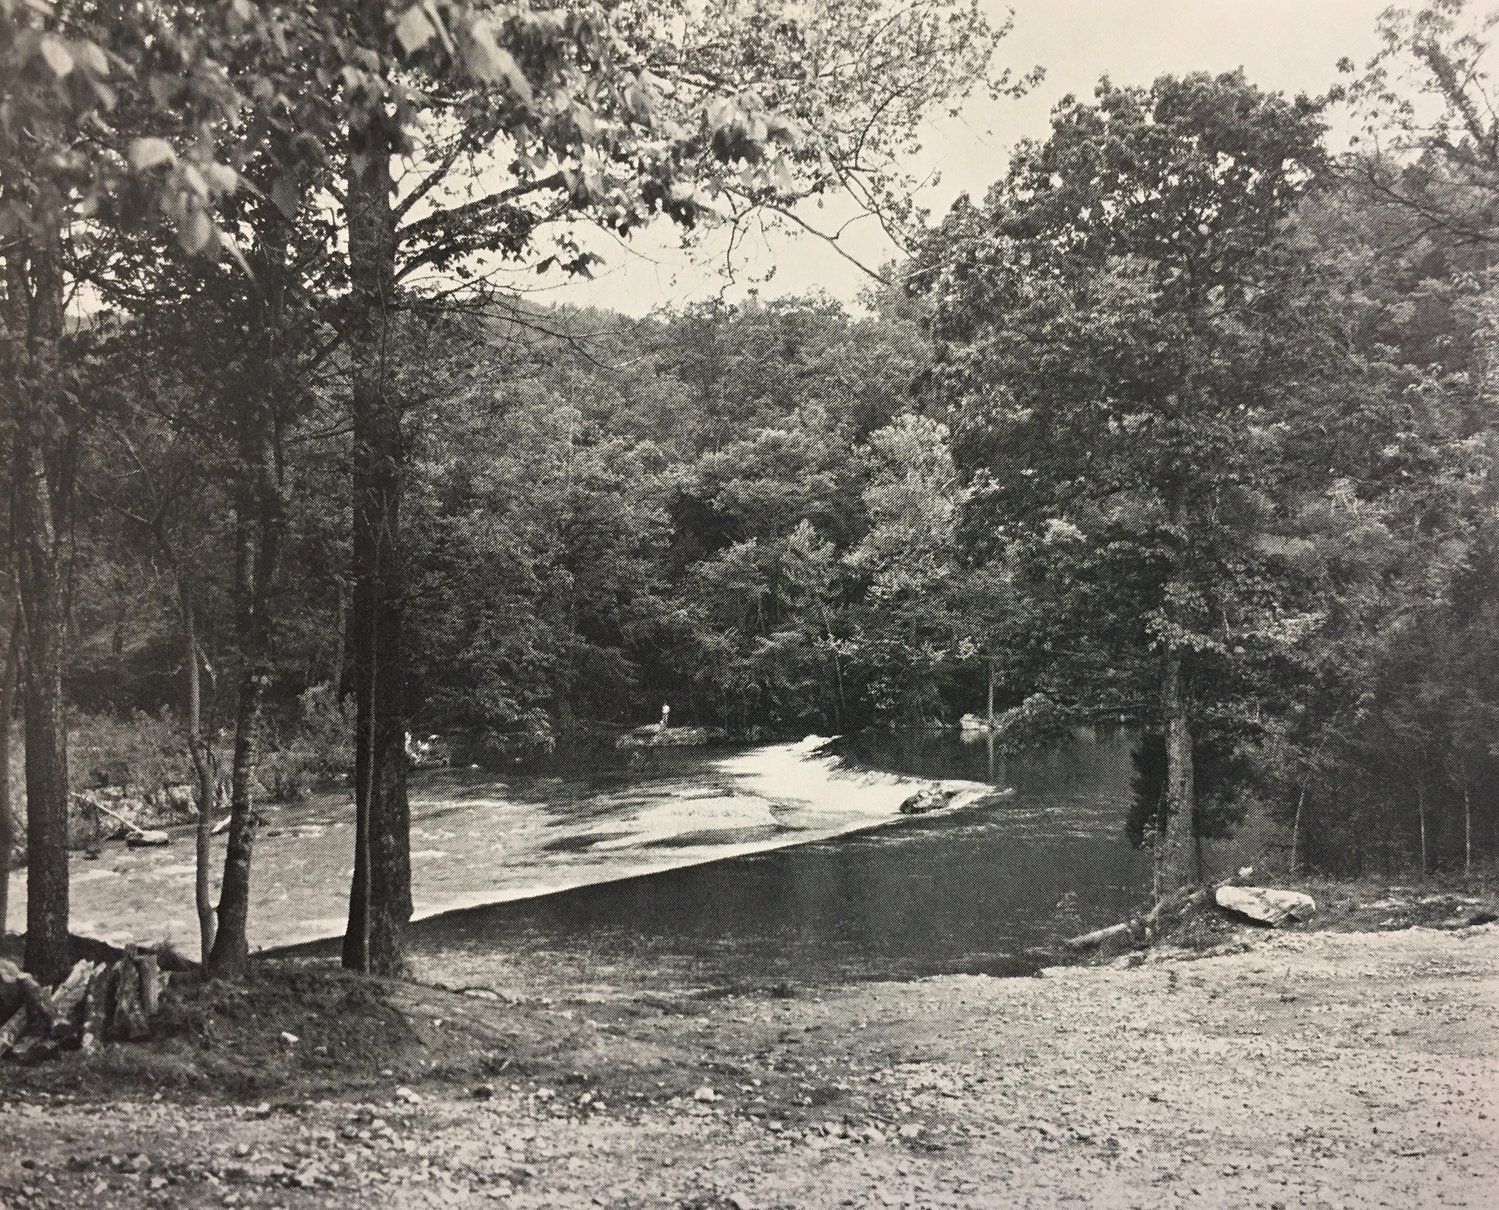 Standing near the new eating area, looking across the river to Grandma’s fishing rock, this is a view of the new Dawt landing. [The face of the river looks quite different today, with the dam gone.]